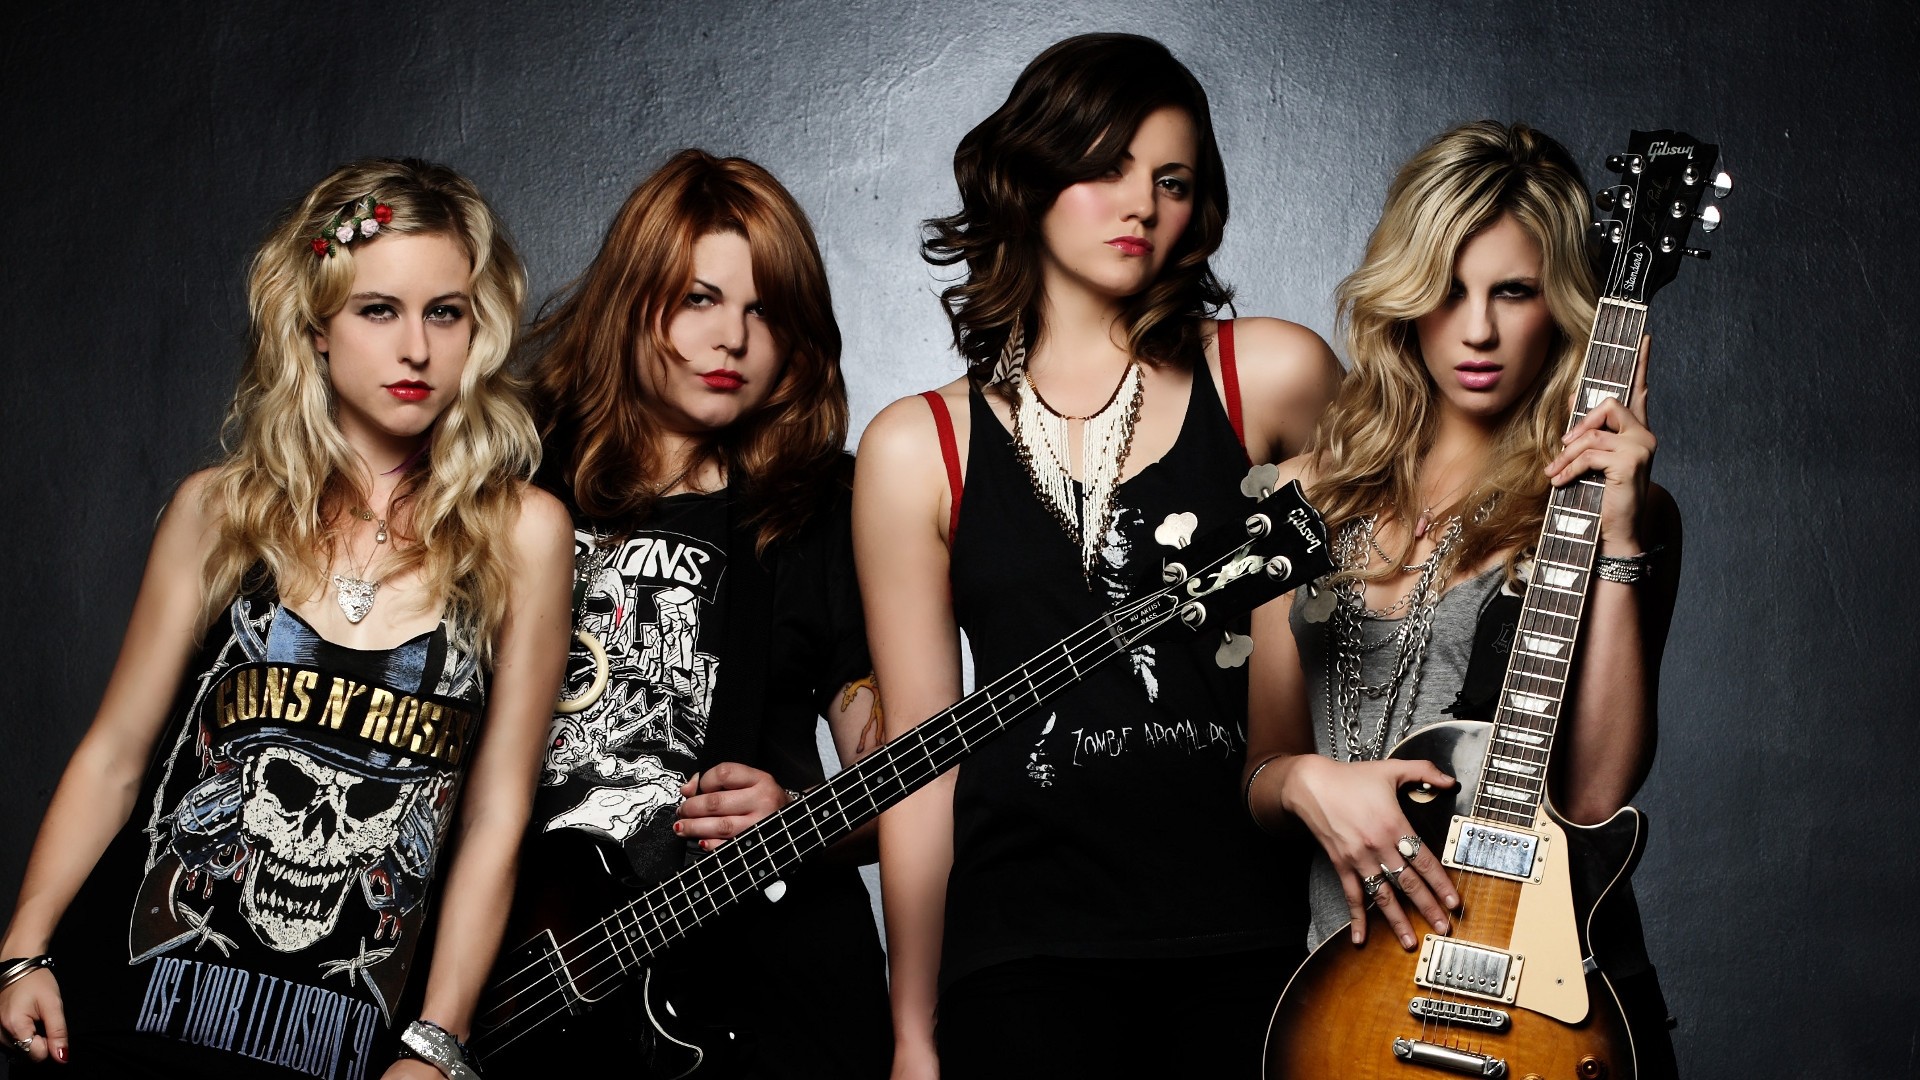 1920x1080 Get the latest the donnas, girls, print news, pictures and videos and learn  all about the donnas, girls, print from wallpapers4u.org, your wallpaper  news ...